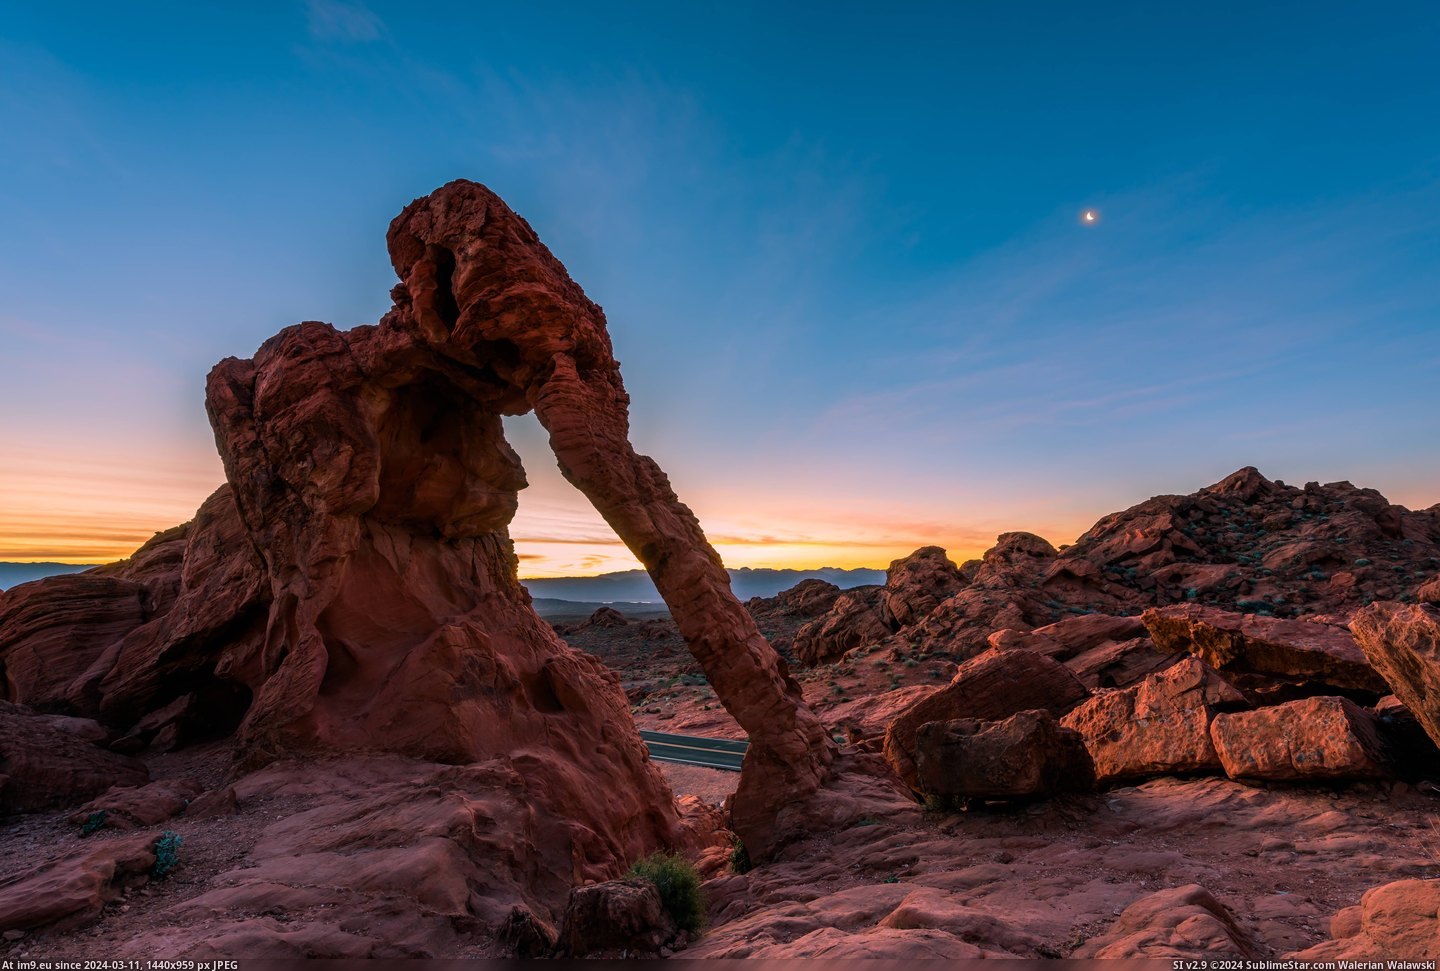 #Park #State #Valley #United #Arizona #Elephant #States #Rock #Fire [Earthporn] Elephant Rock, Valley of Fire State Park, Arizona, United States  [7360x4912] Pic. (Изображение из альбом My r/EARTHPORN favs))